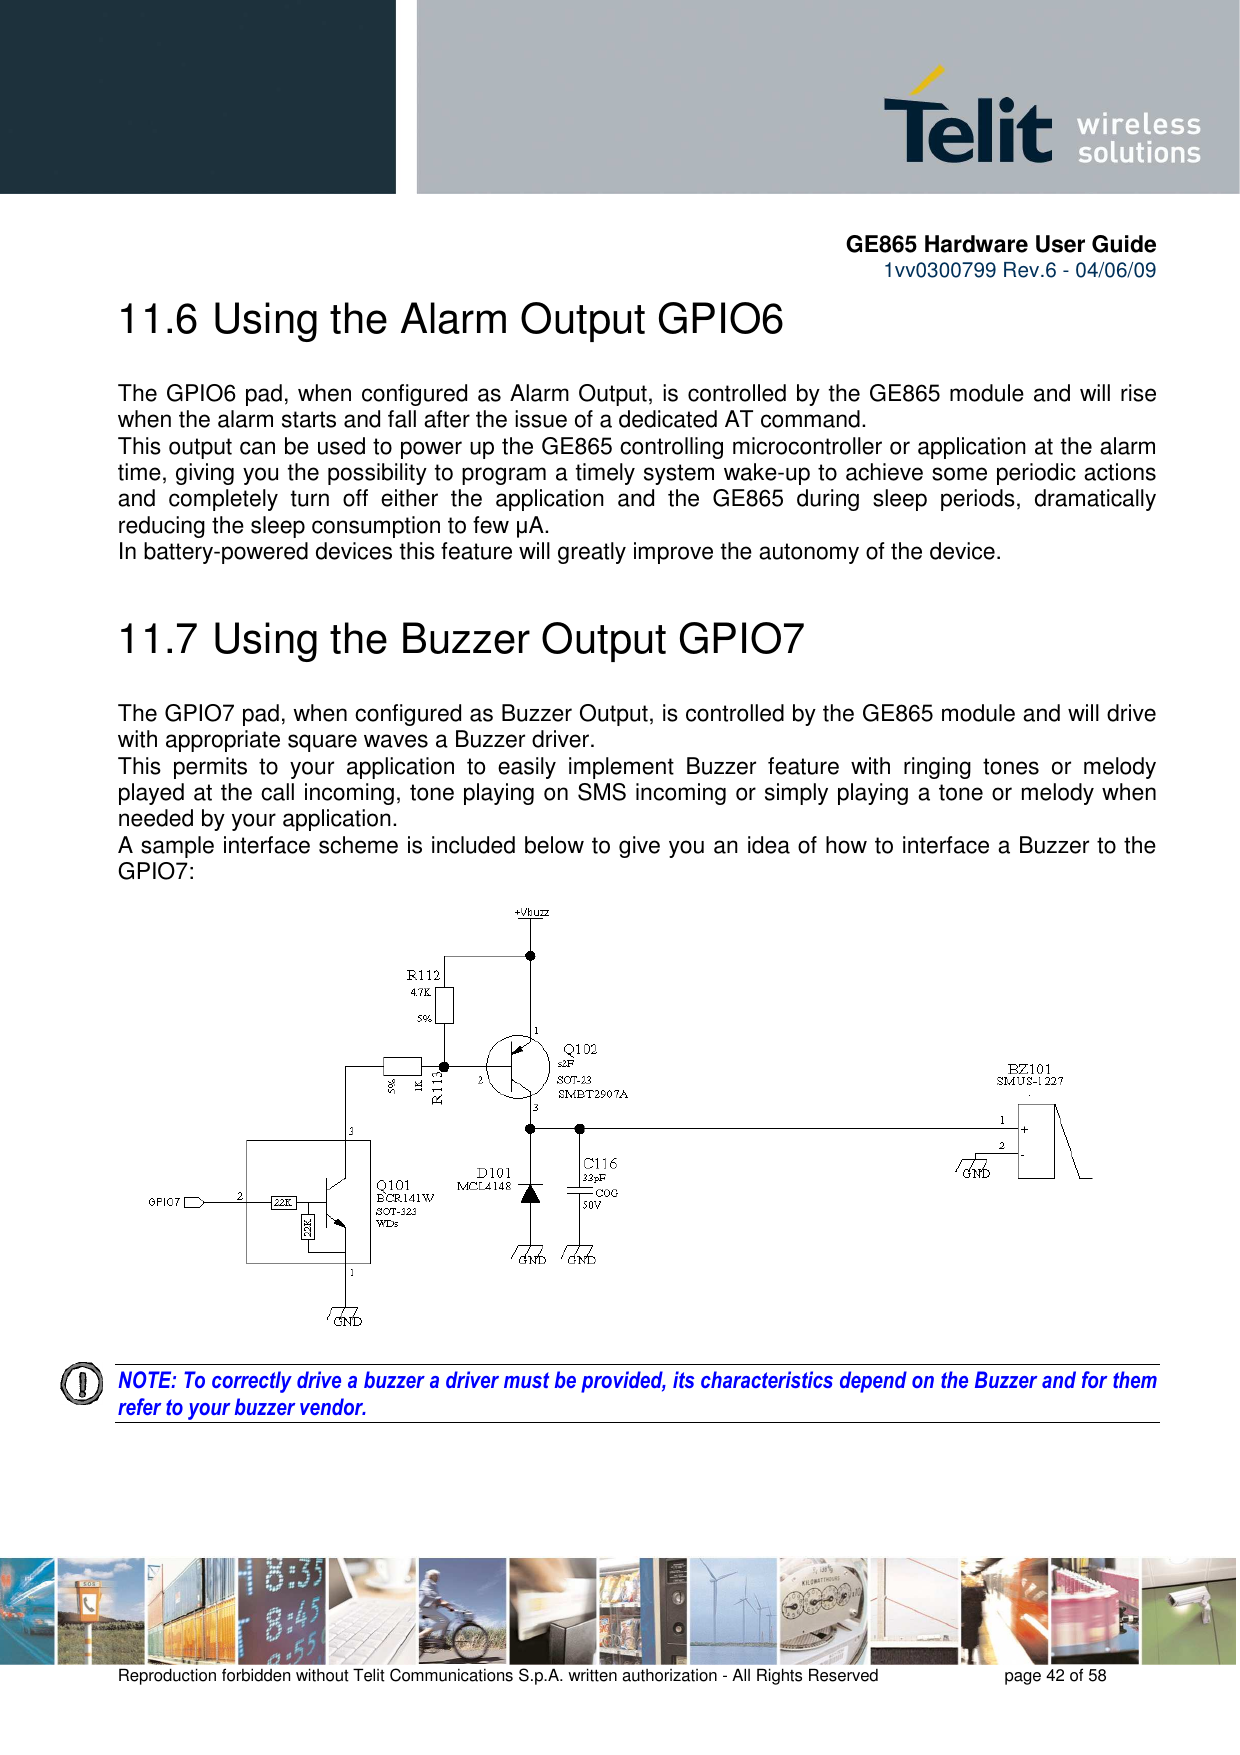       GE865 Hardware User Guide 1vv0300799 Rev.6 - 04/06/09      Reproduction forbidden without Telit Communications S.p.A. written authorization - All Rights Reserved    page 42 of 58  11.6  Using the Alarm Output GPIO6 The GPIO6 pad, when configured as Alarm Output, is controlled by the GE865 module and will rise when the alarm starts and fall after the issue of a dedicated AT command. This output can be used to power up the GE865 controlling microcontroller or application at the alarm time, giving you the possibility to program a timely system wake-up to achieve some periodic actions and  completely  turn  off  either  the  application  and  the  GE865  during  sleep  periods,  dramatically reducing the sleep consumption to few µA. In battery-powered devices this feature will greatly improve the autonomy of the device. 11.7  Using the Buzzer Output GPIO7 The GPIO7 pad, when configured as Buzzer Output, is controlled by the GE865 module and will drive with appropriate square waves a Buzzer driver. This  permits  to  your  application  to  easily  implement  Buzzer  feature  with  ringing  tones  or  melody played at the call incoming, tone playing on SMS incoming or simply playing a tone or melody when needed by your application. A sample interface scheme is included below to give you an idea of how to interface a Buzzer to the GPIO7:  NOTE: To correctly drive a buzzer a driver must be provided, its characteristics depend on the Buzzer and for them refer to your buzzer vendor.   